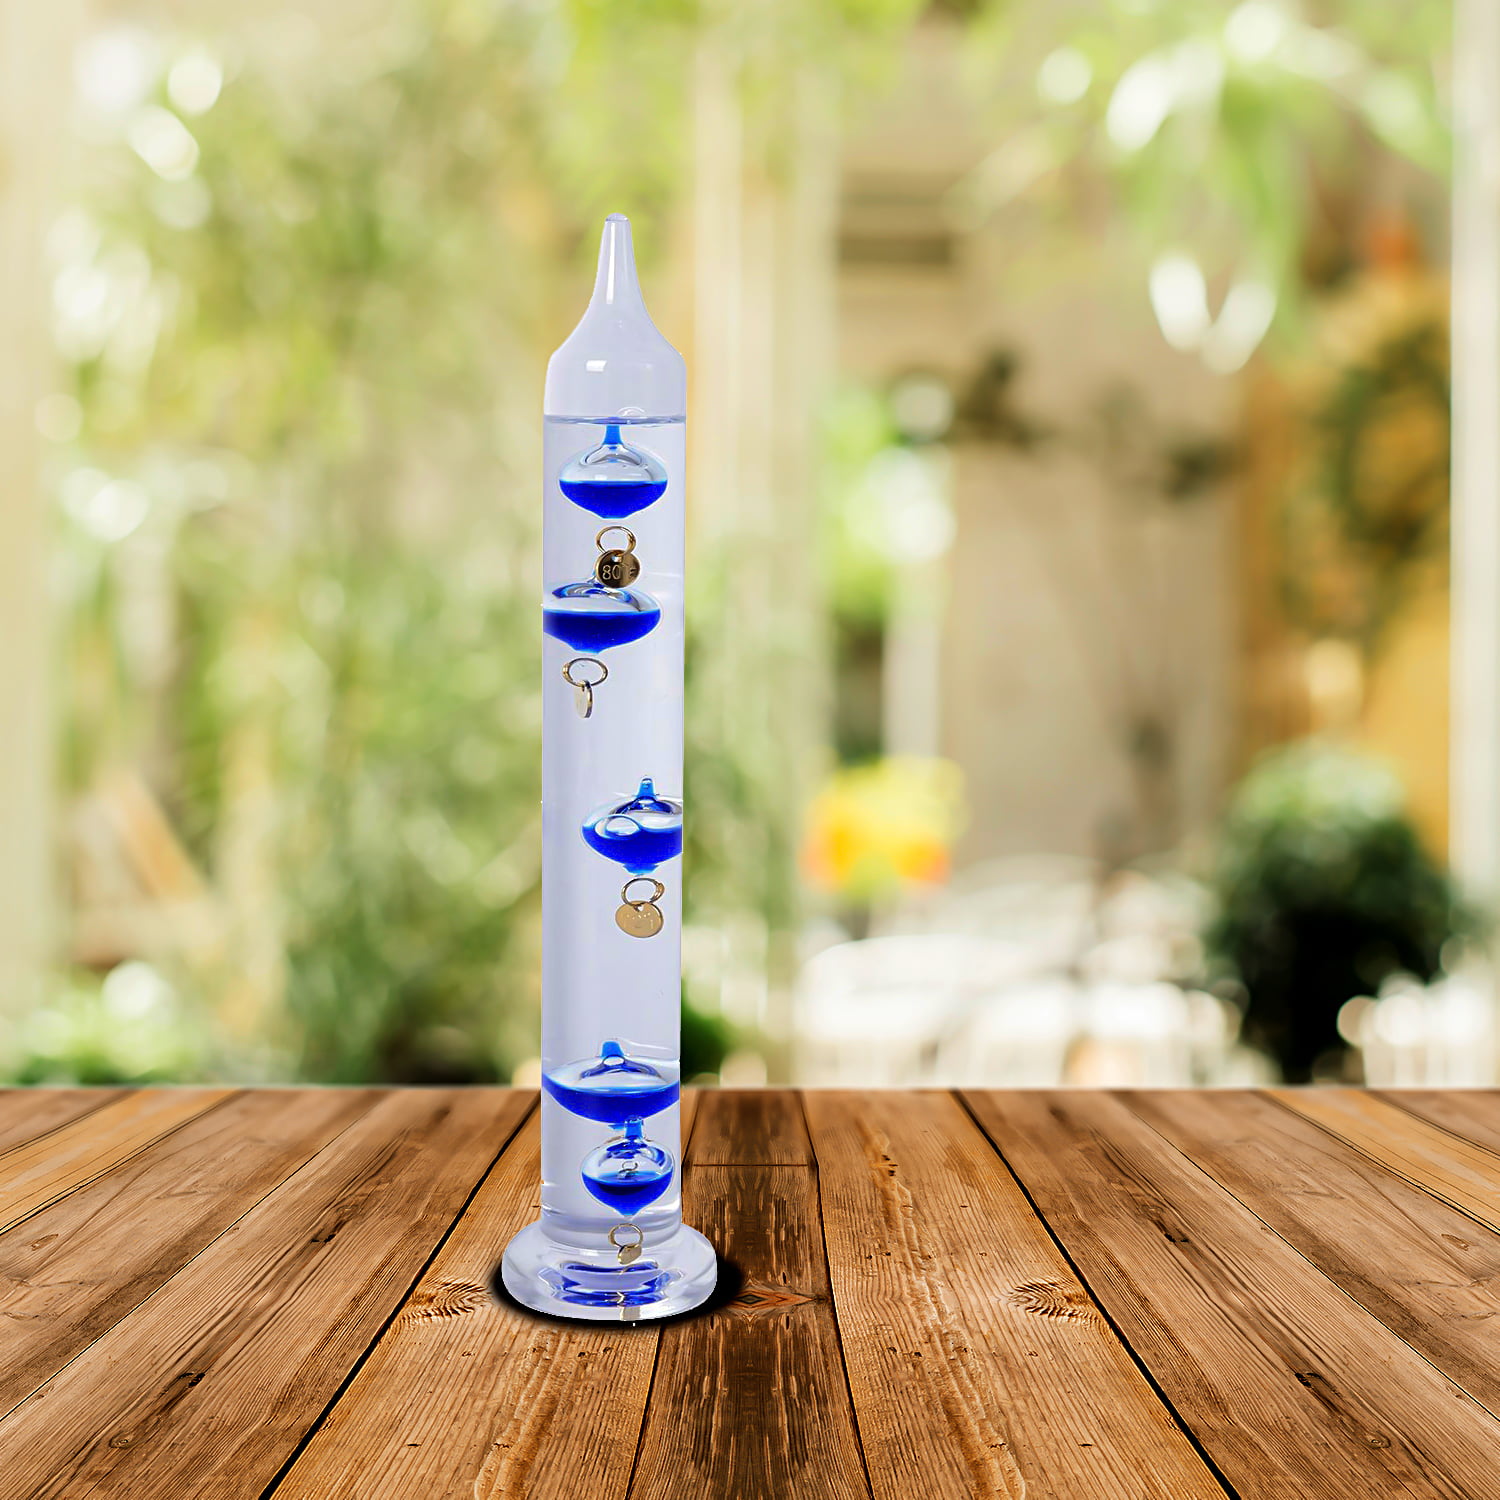 Shop LC Home Living Room Decor Gift Blue Galileo Thermometer with Floating Balls 